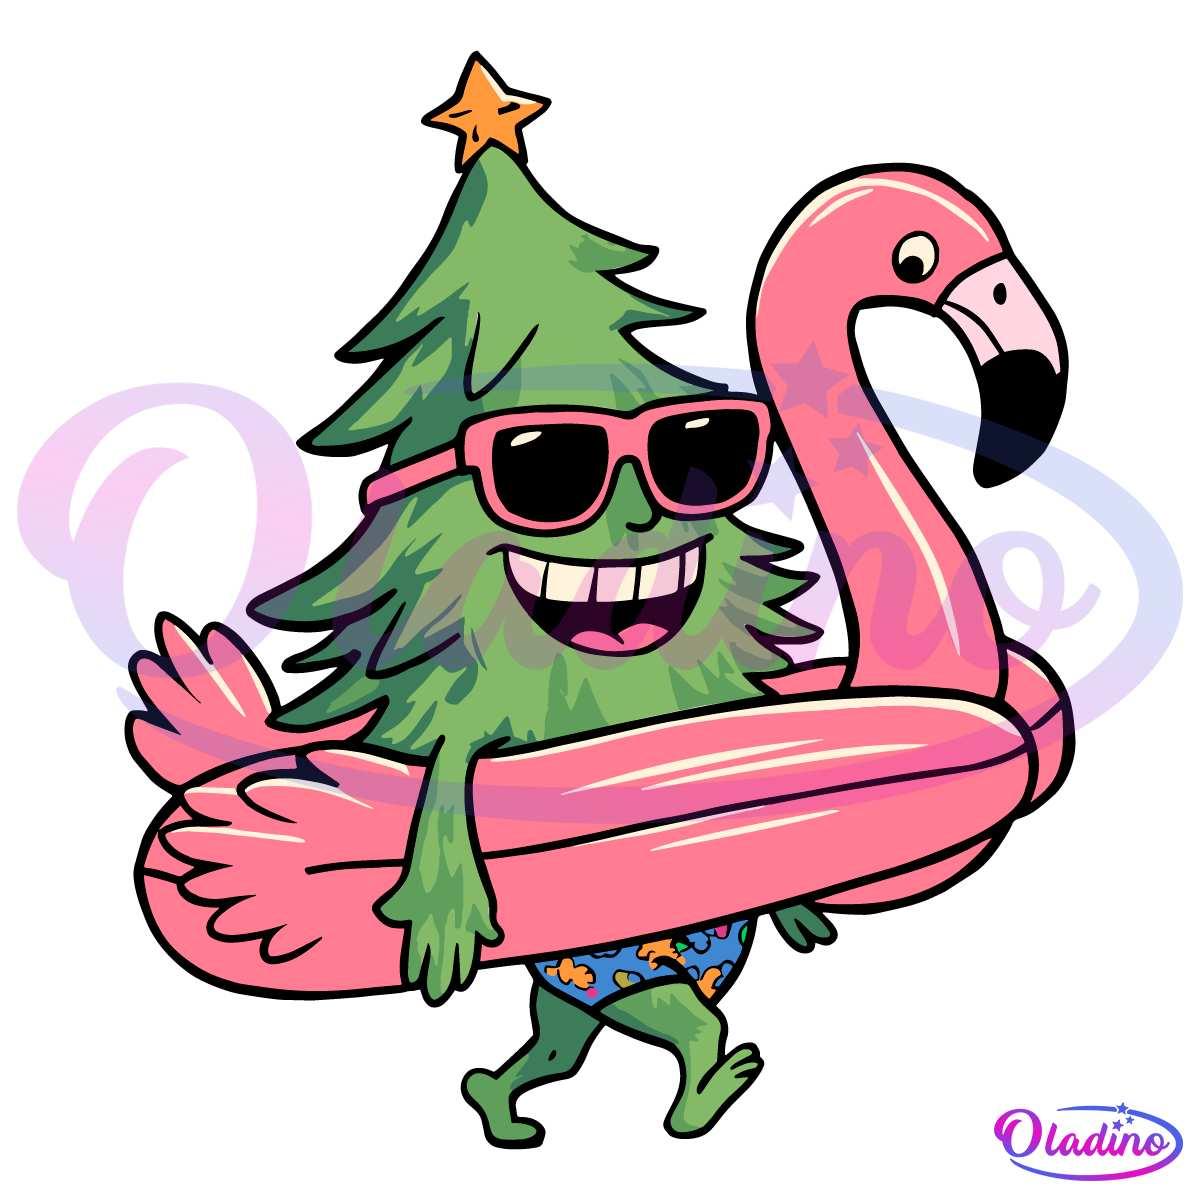 A cheerful, cartoonish Christmas tree wearing sunglasses and floral swim trunks walks while carrying an inflatable pink flamingo pool float. The tree has a star on top and a big smile, creating a fun juxtaposition of summer and holiday themes.